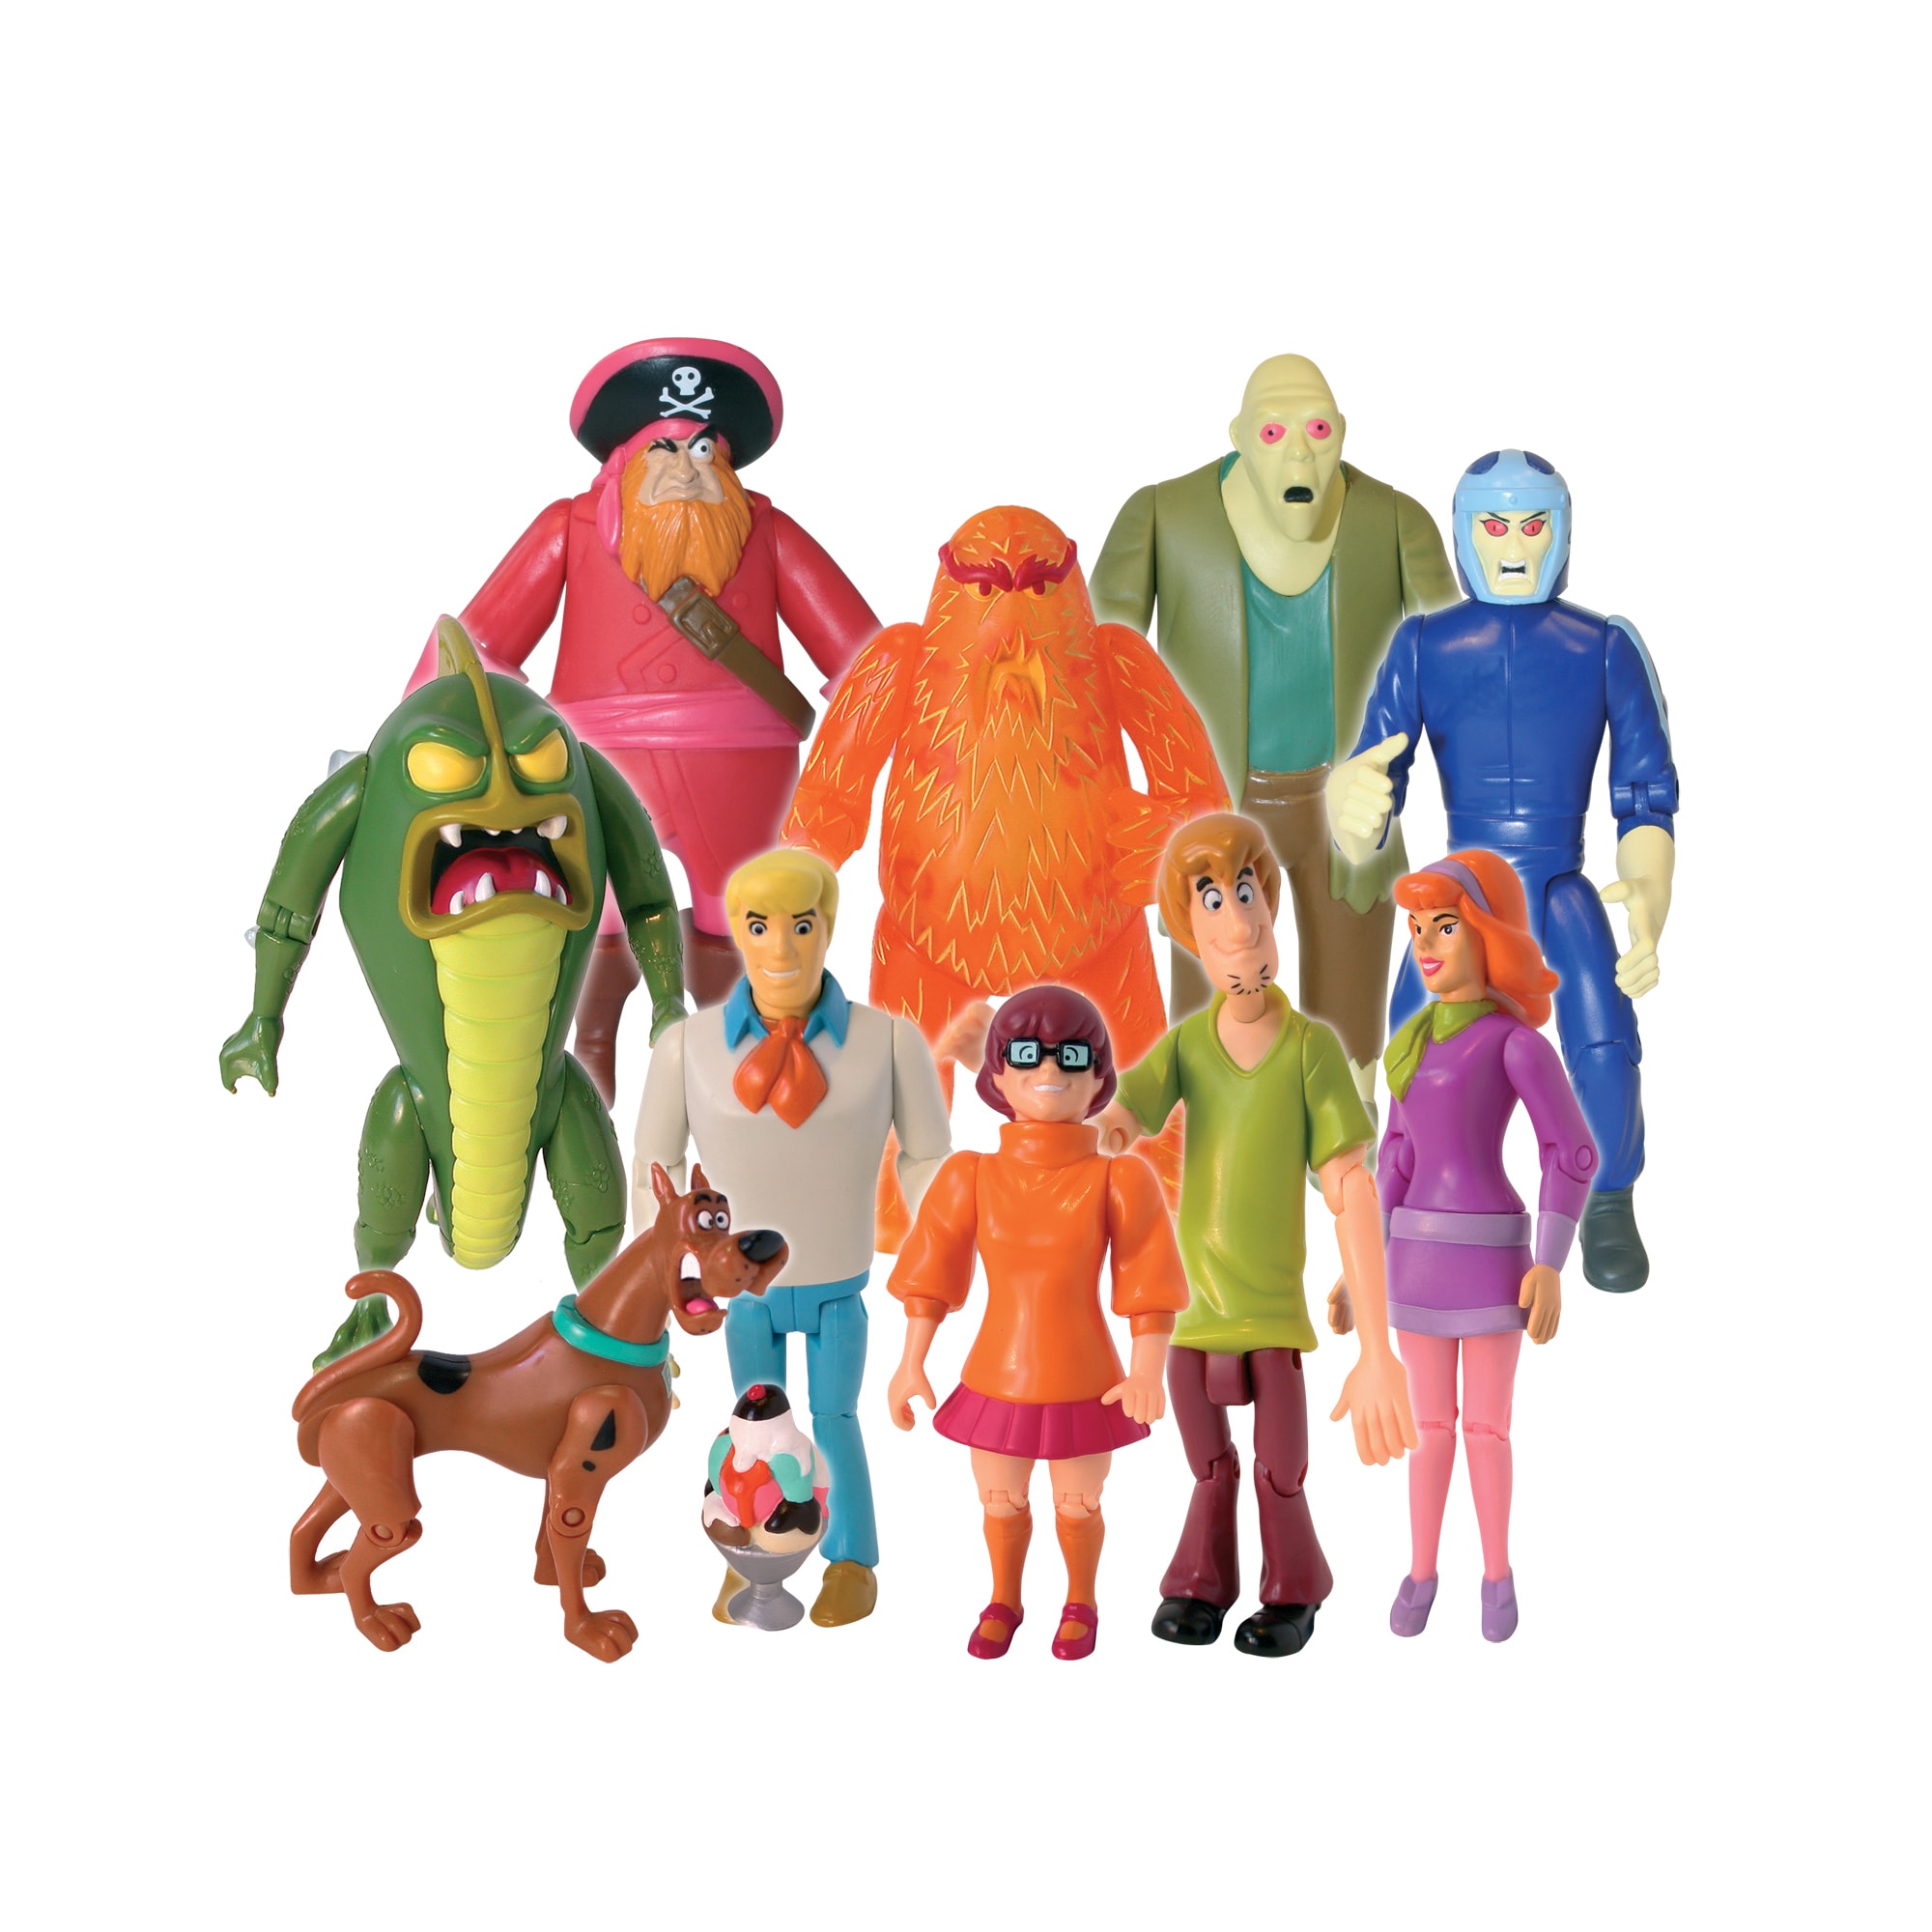 scooby doo mystery crew and monsters action figure set